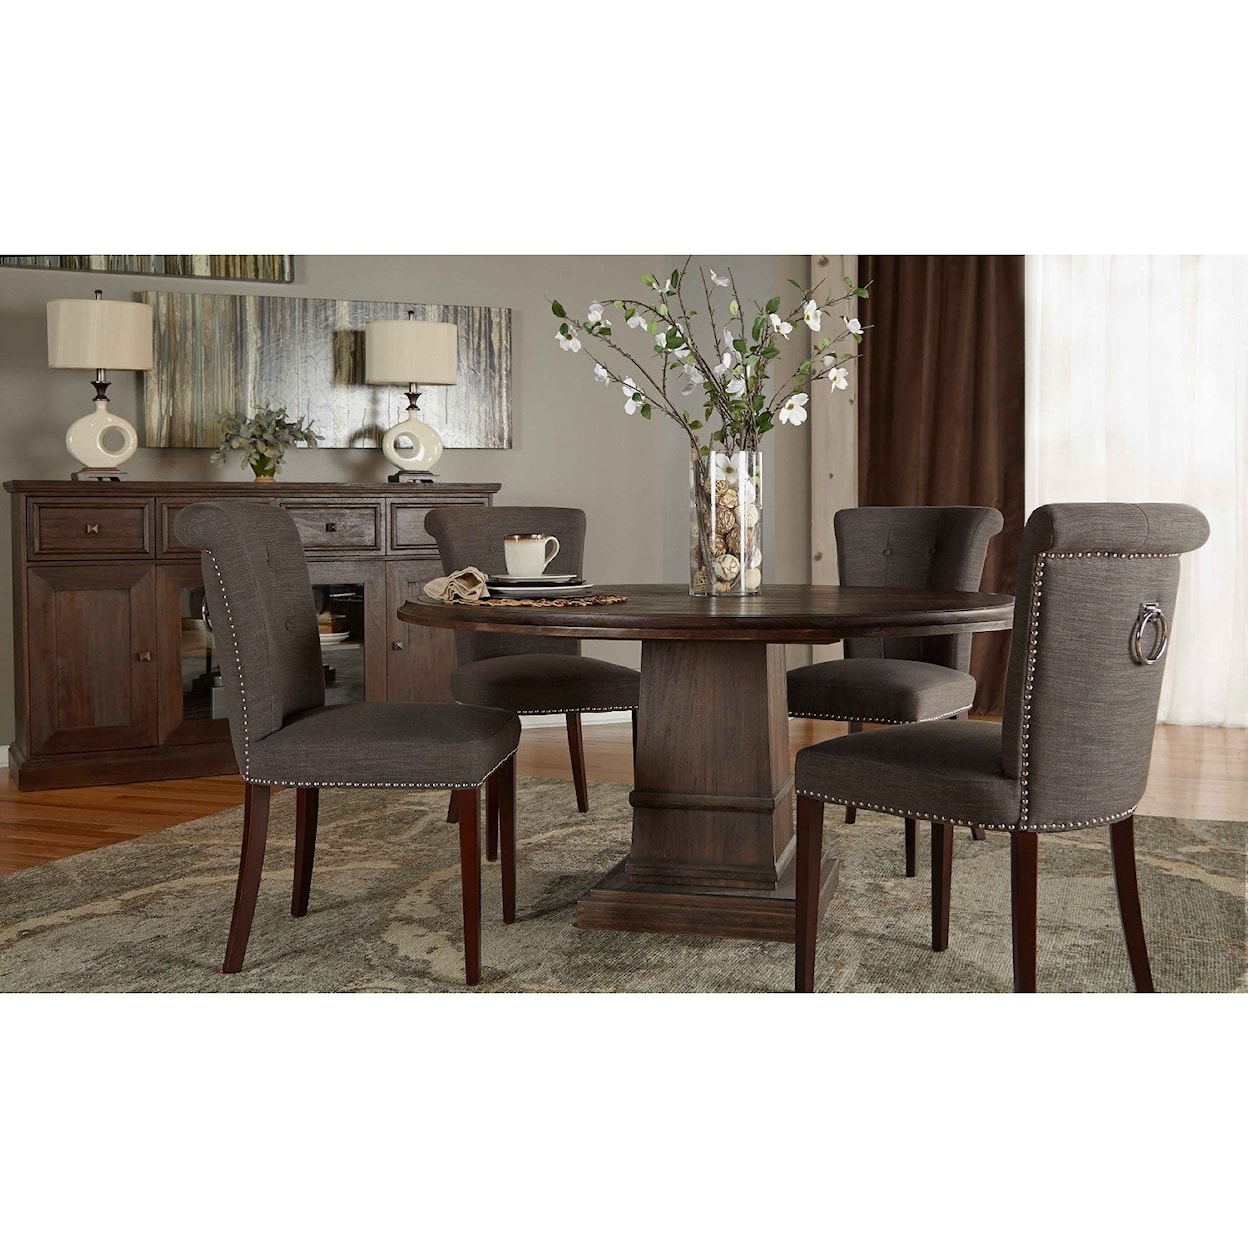 Essentials for Living Villa Luxe Dining Chair